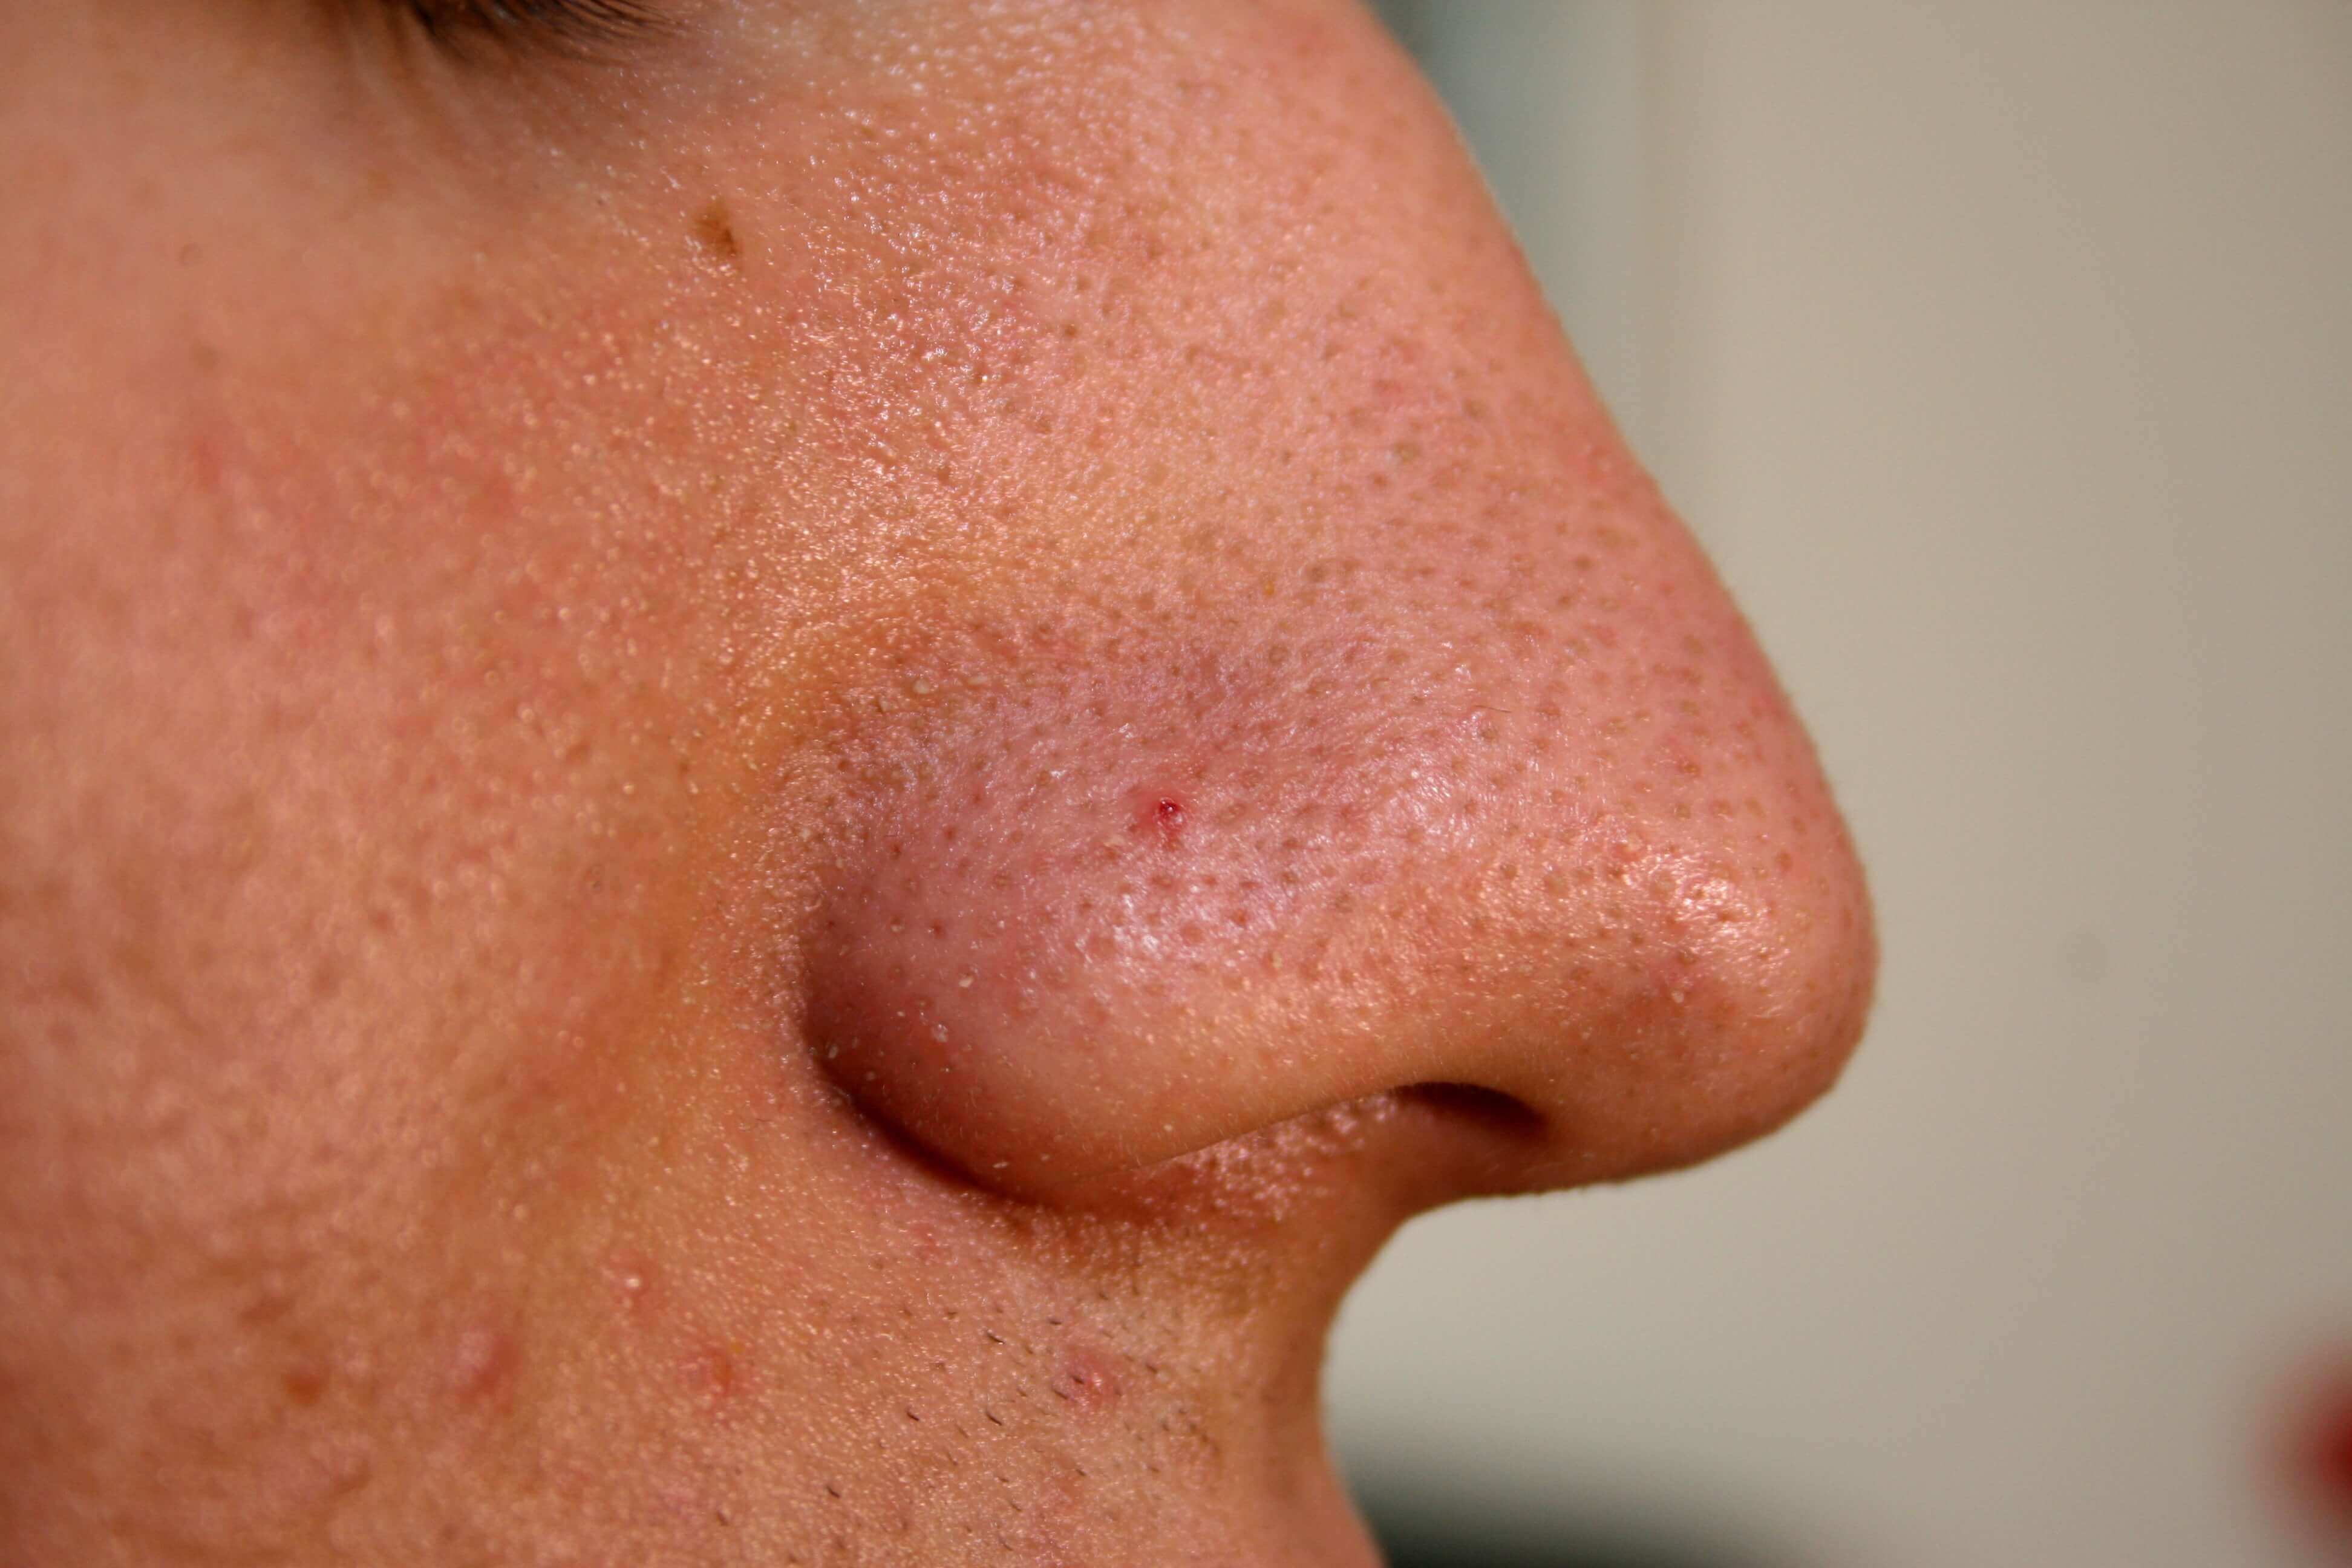 HOW TO GET RID OF BLACKHEADS ON NOSE AND CHIN